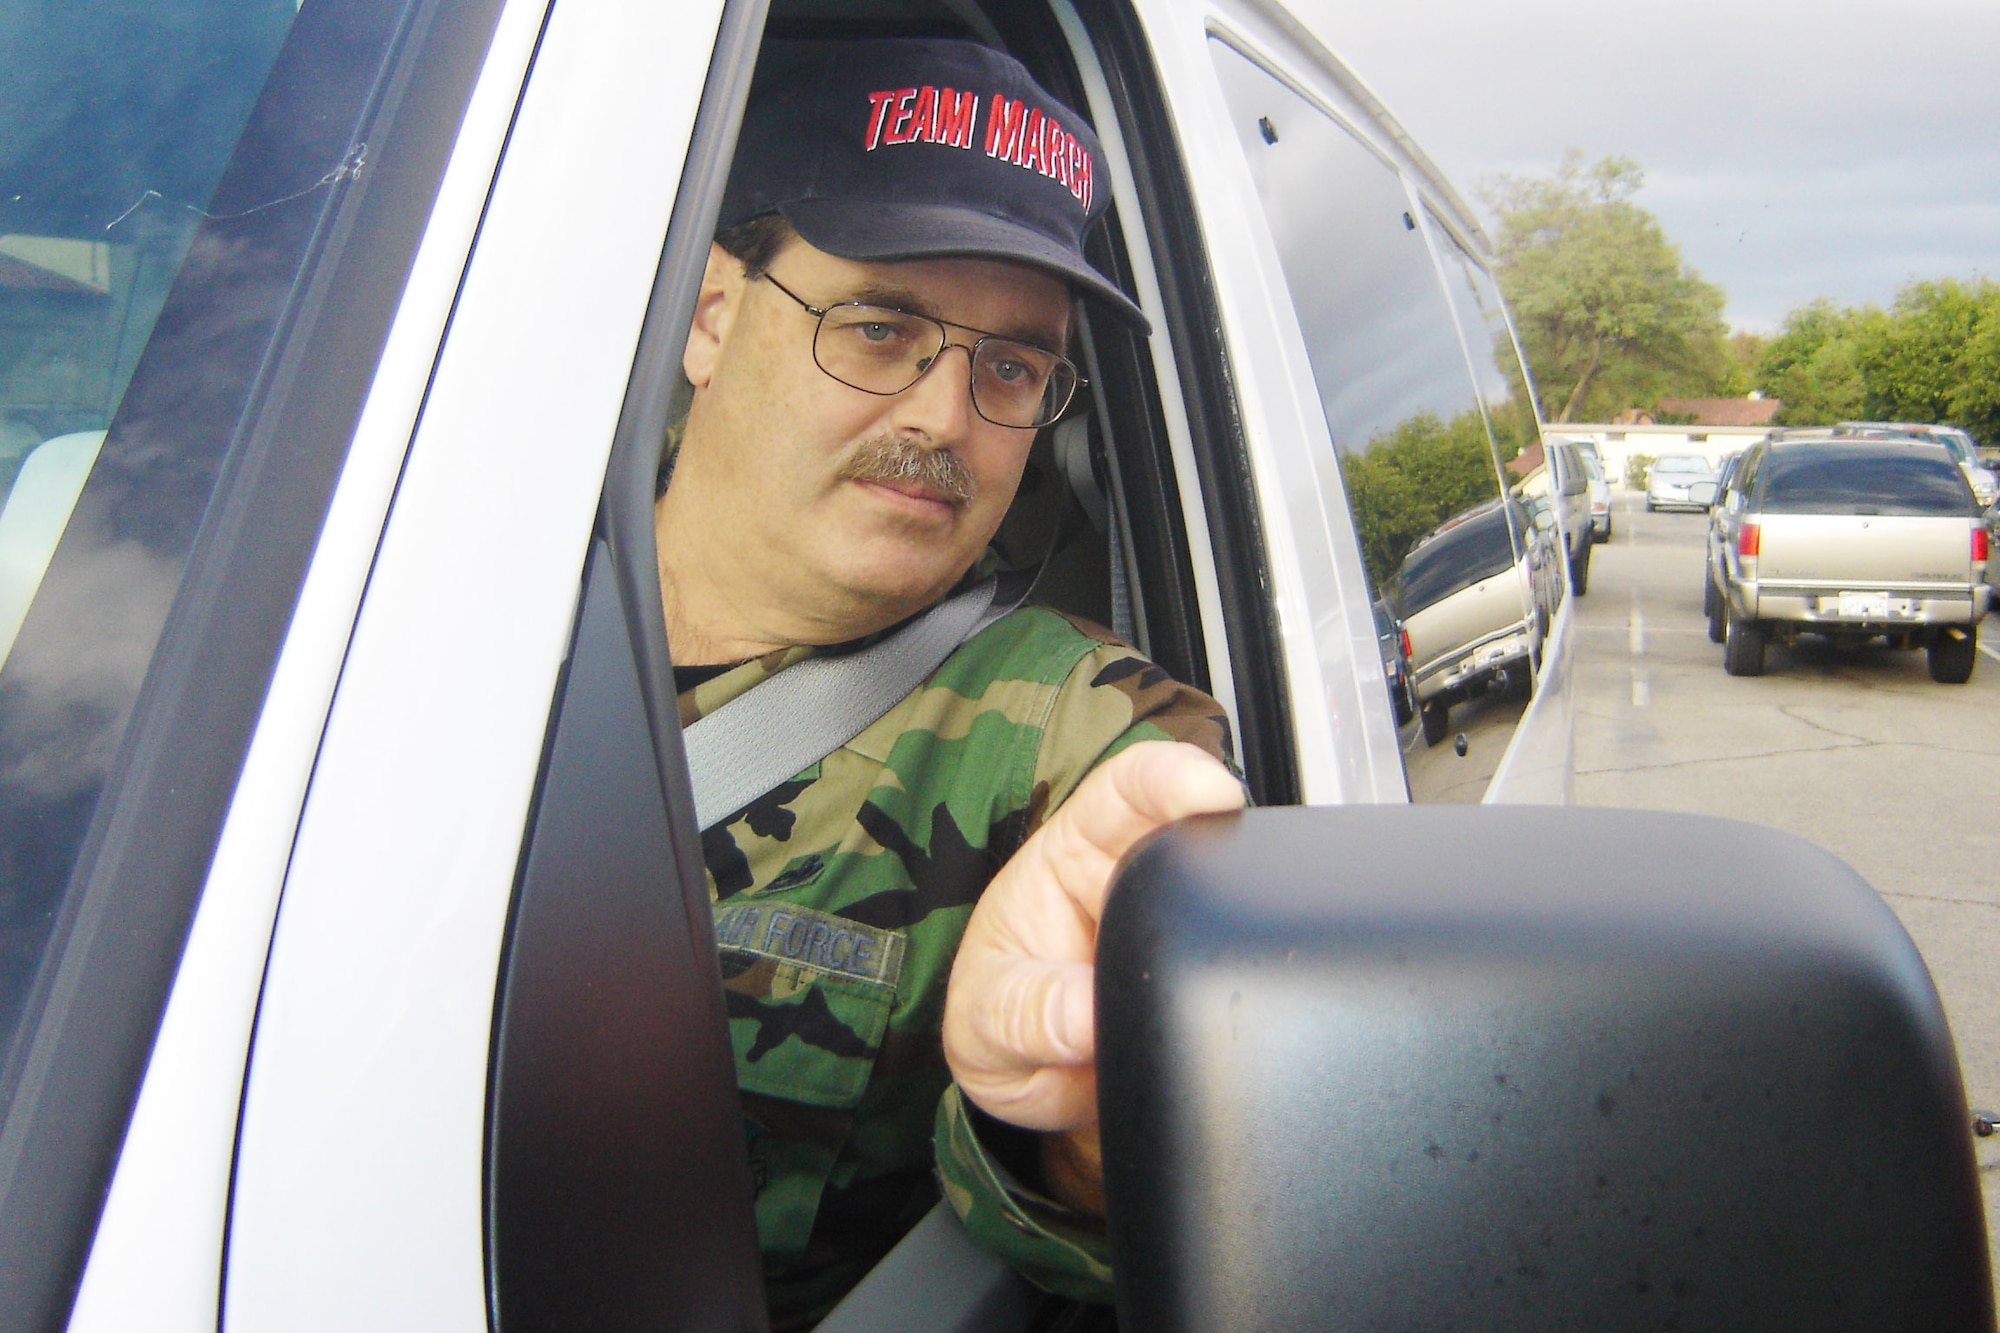 Master Sgt. Joseph Vitelli, 452 MXG/QA, adjusts his mirror shortly before picking up members of his Vanpool, Tuesday, for the ride home to Temecula from March ARB. The base took delivery of the brand new eight-passenger Ford E-350 van, Oct. 29,  after Sergeant Vitelli and others gathered enough riders for the money-saving trip. The pool took its maiden ride on Monday. Sergeant Vitelli, the pool’s primary driver, said the van is full, but if more wanted to join, getting a larger van is possible. ( U.S. Air Force photo by Will Alexander)